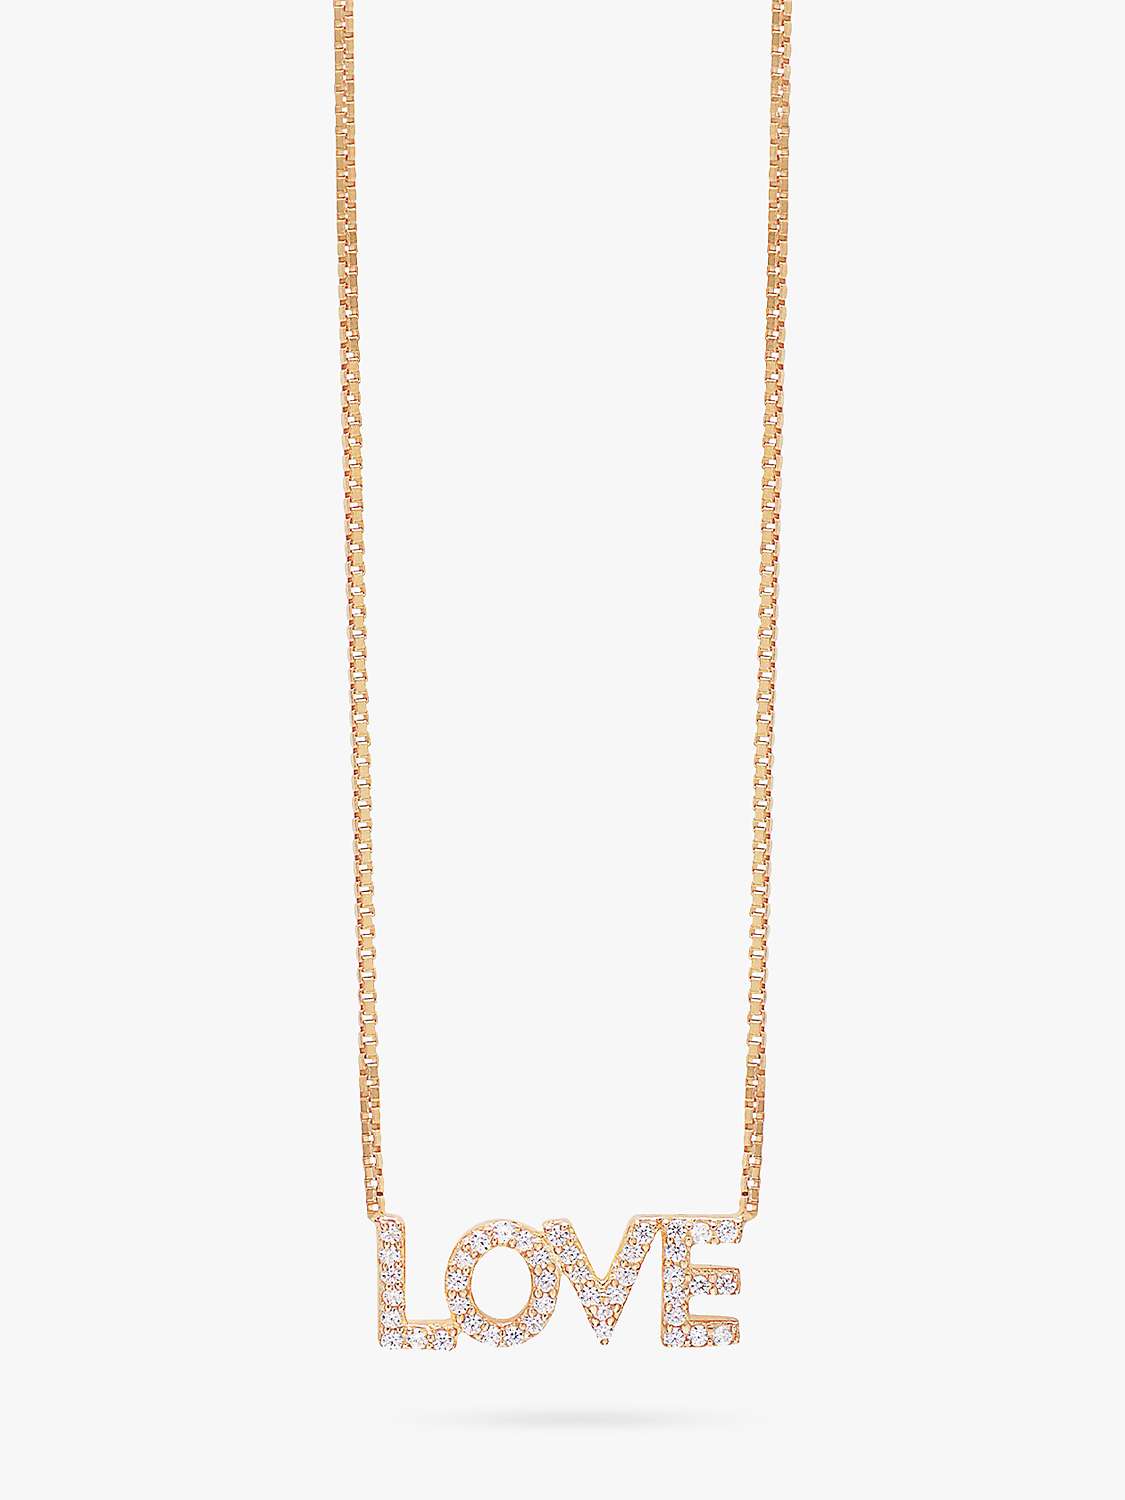 Buy Rachel Jackson London Solid Gold and Diamond Love Necklace, Gold Online at johnlewis.com